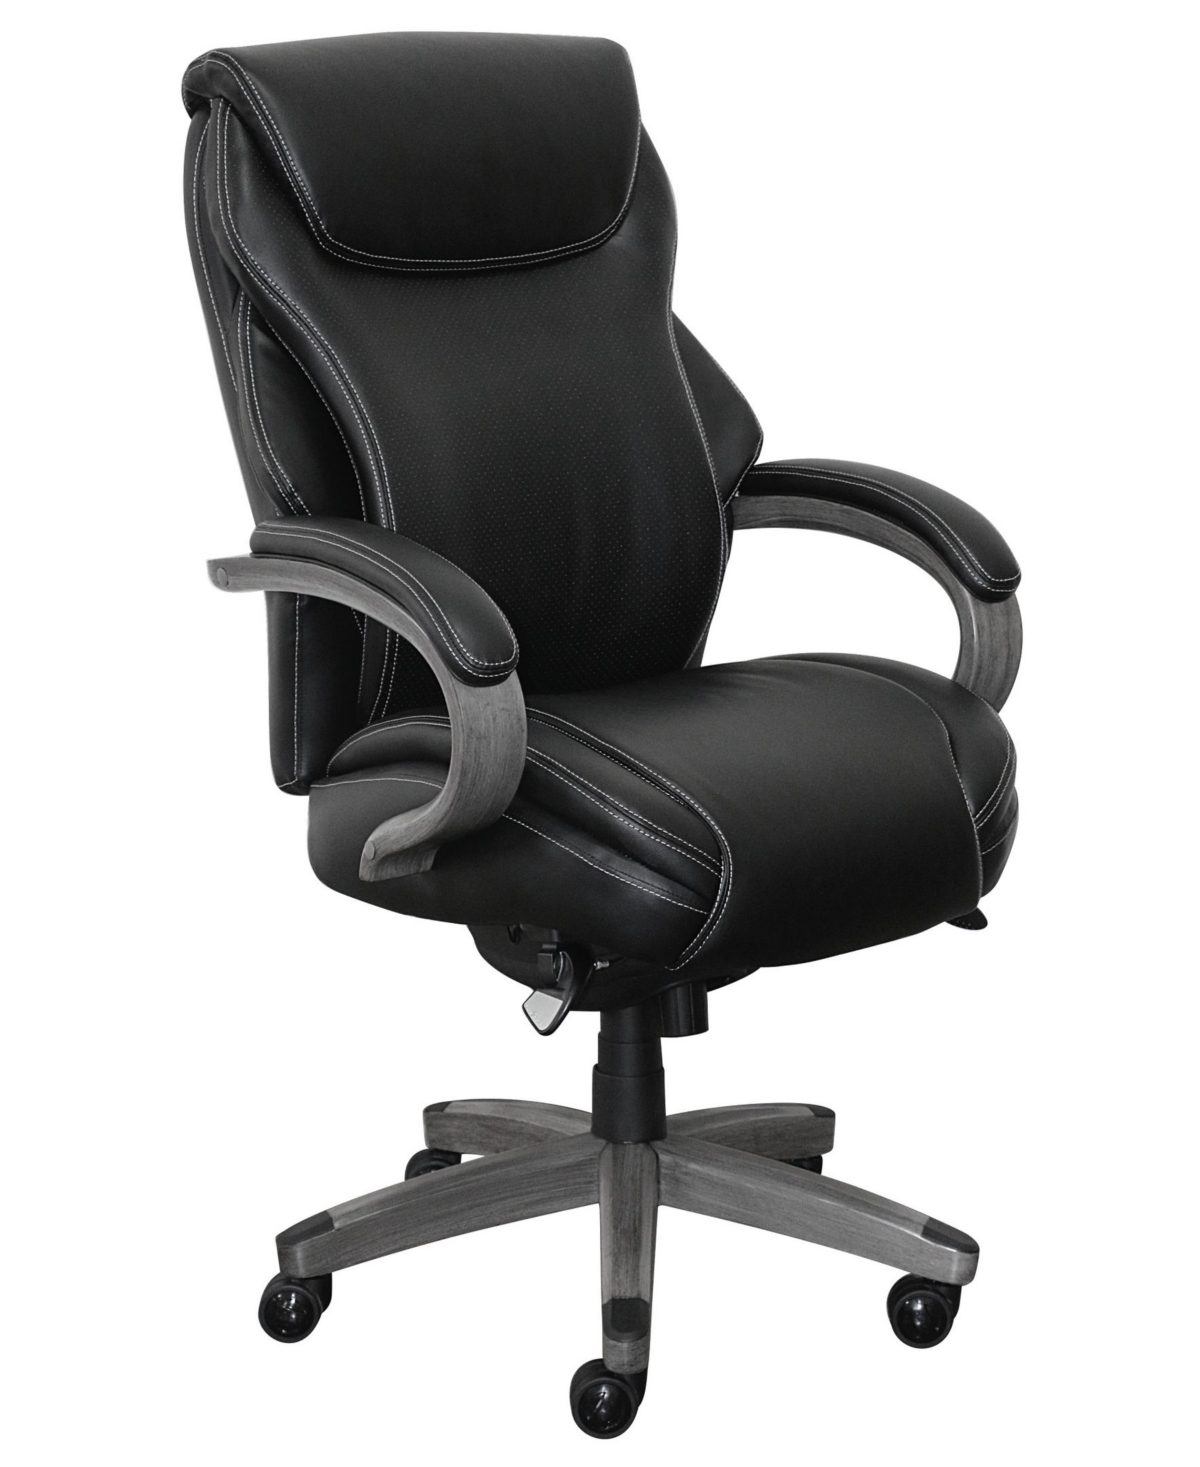 La-z-boy Hyland Executive Office Chair In Black And Grey